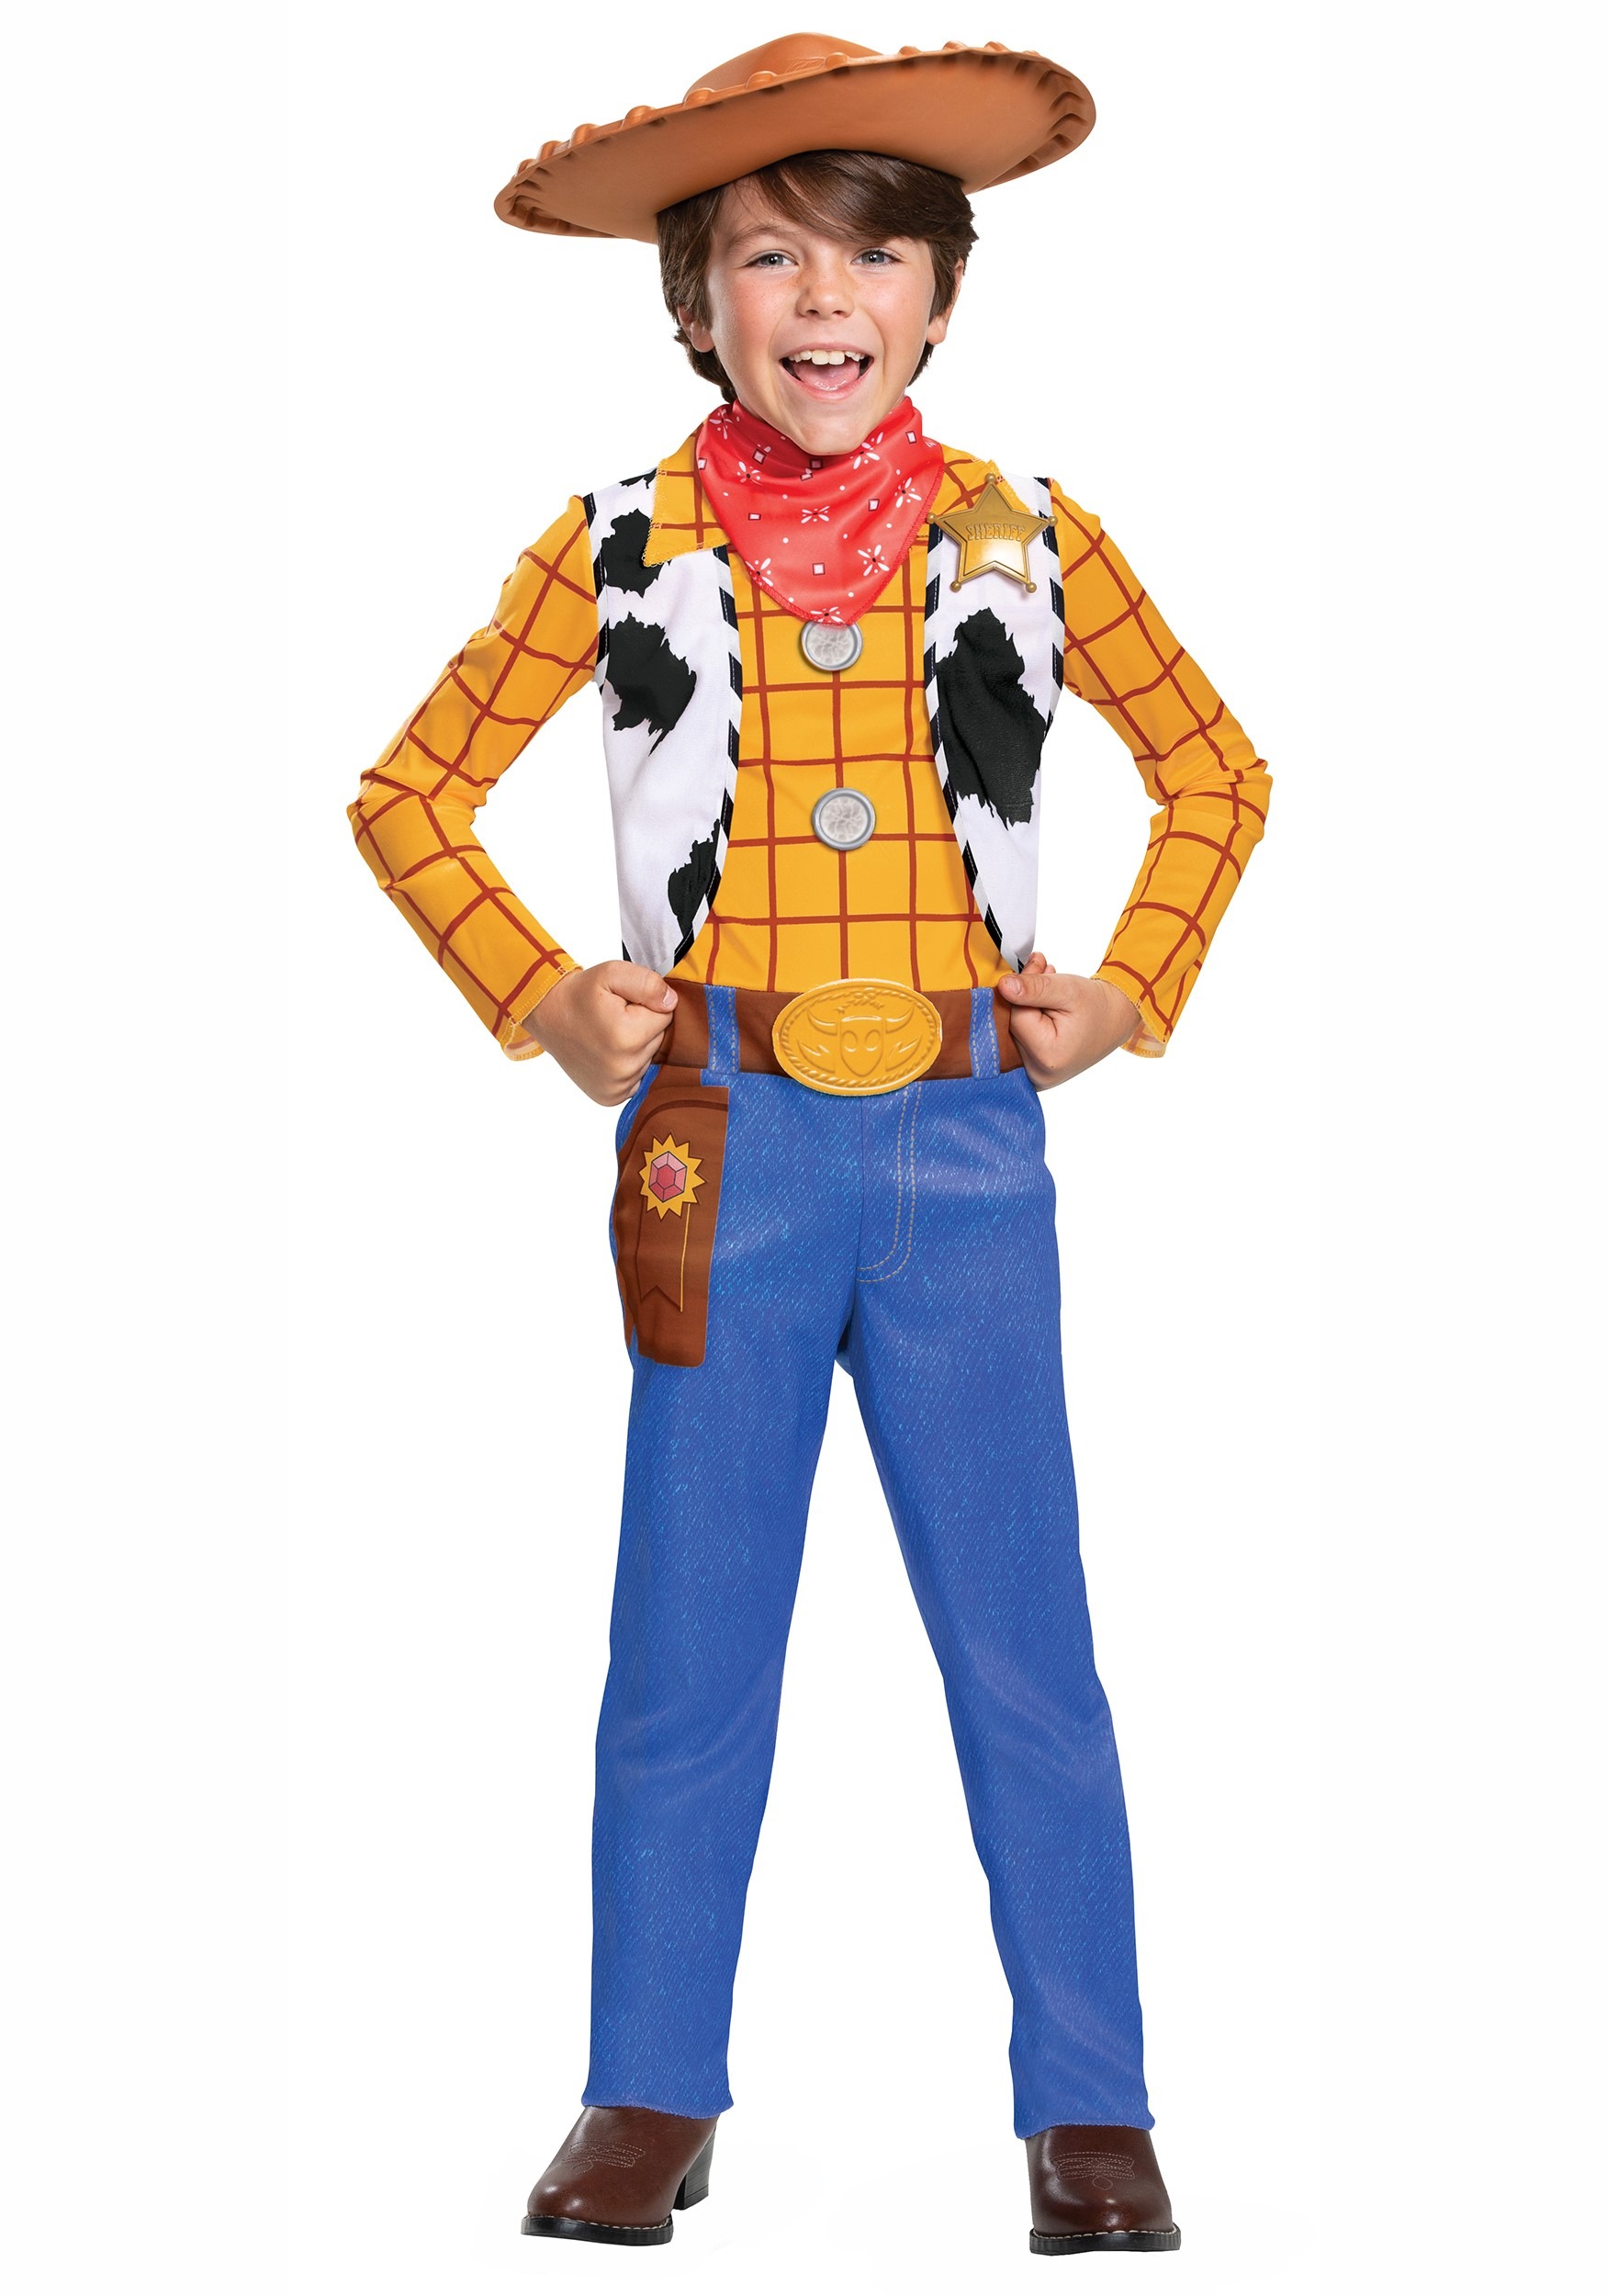 Boys Kids Childs Woody Toy Story Billy Cowboy Fancy Dress Costume Outfit Hat Gun 